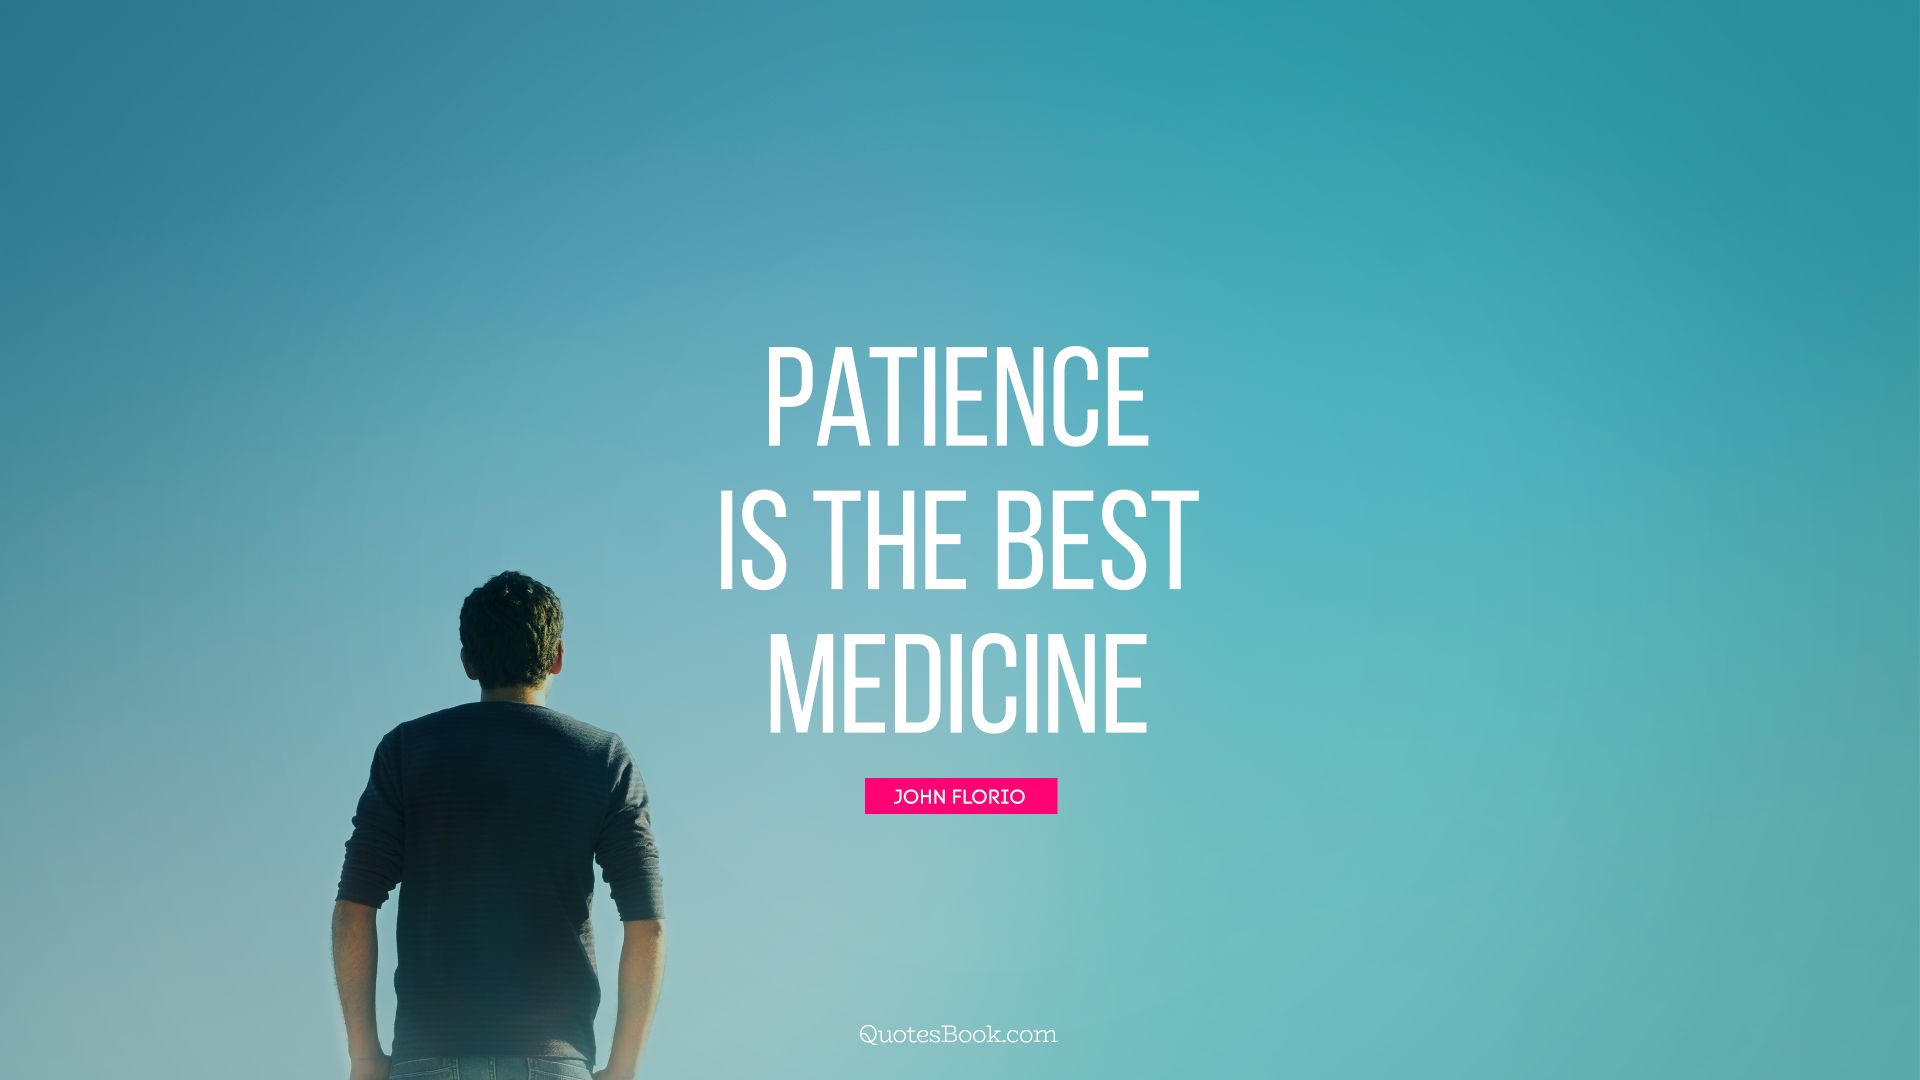 Patience is the best medicine. - Quote by John Florio